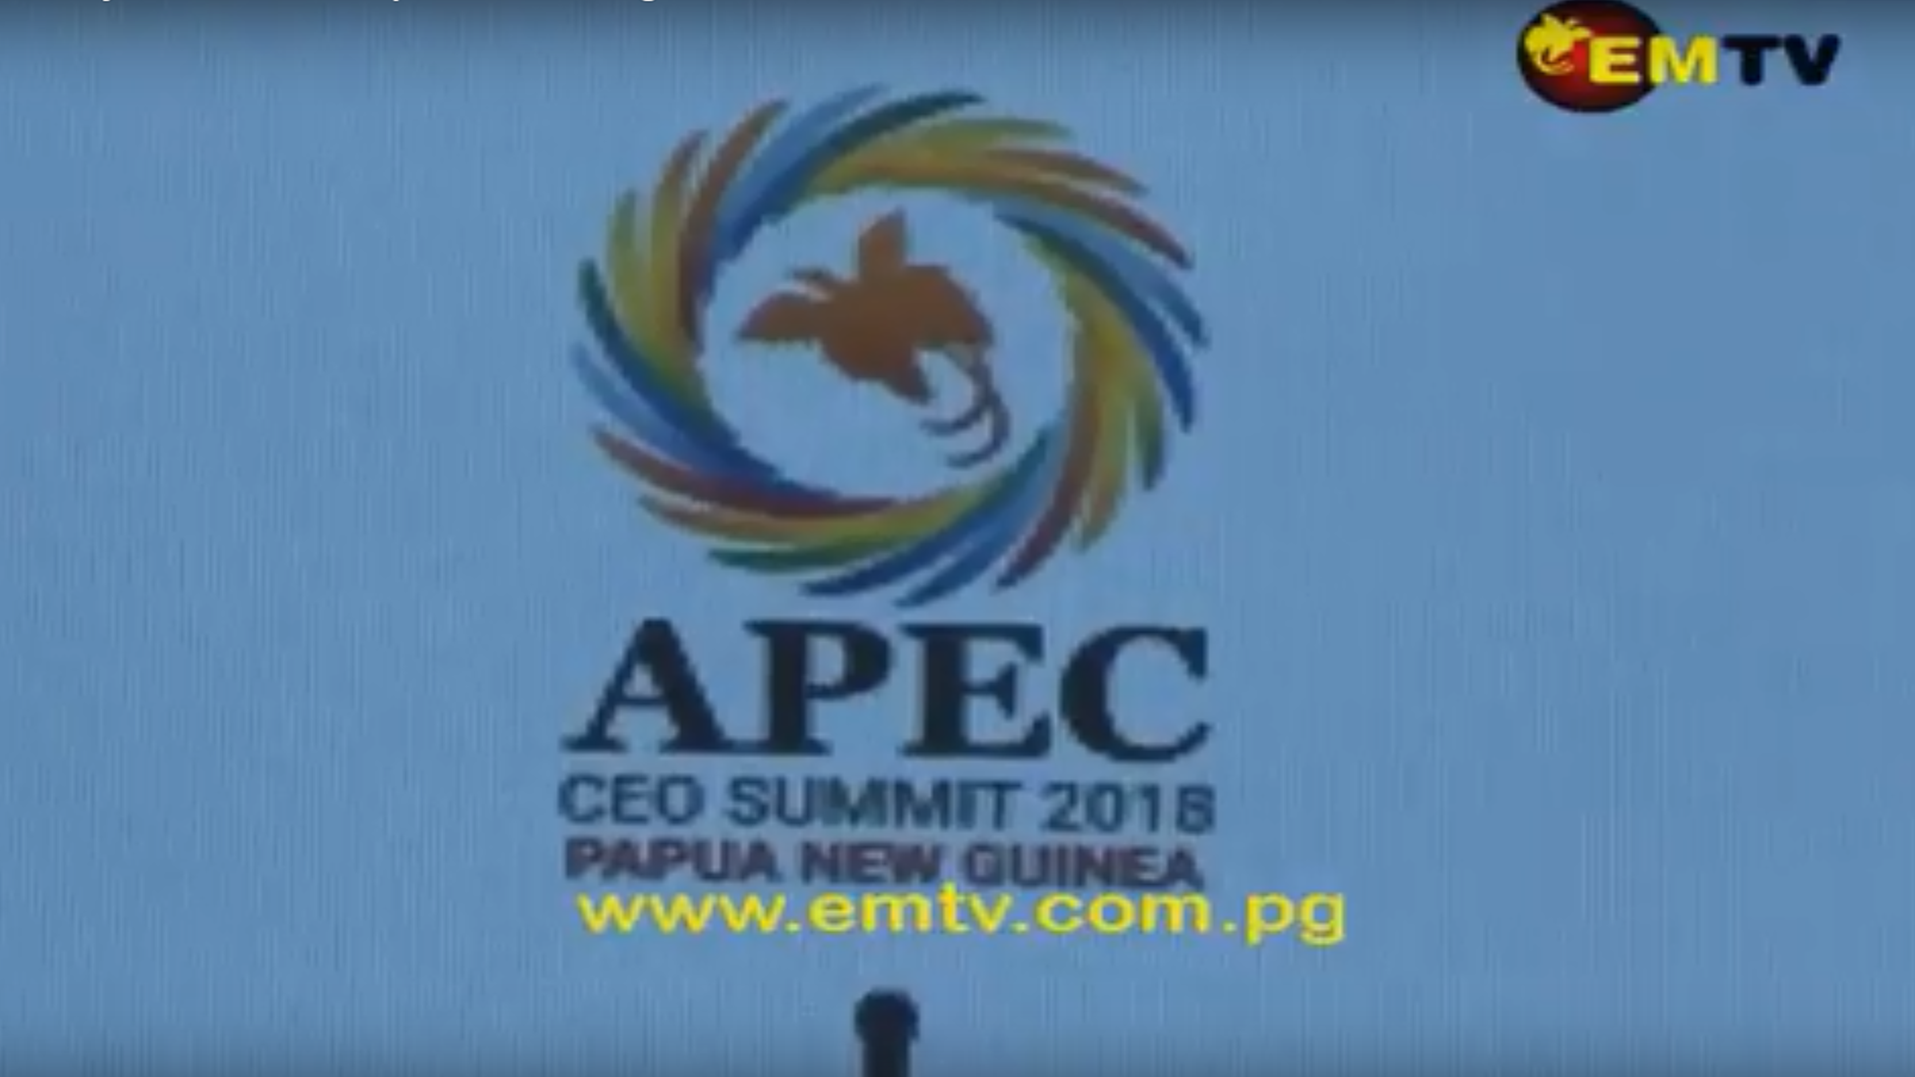 Download Free png APEC Business Advisory Council Gold Sponsors.